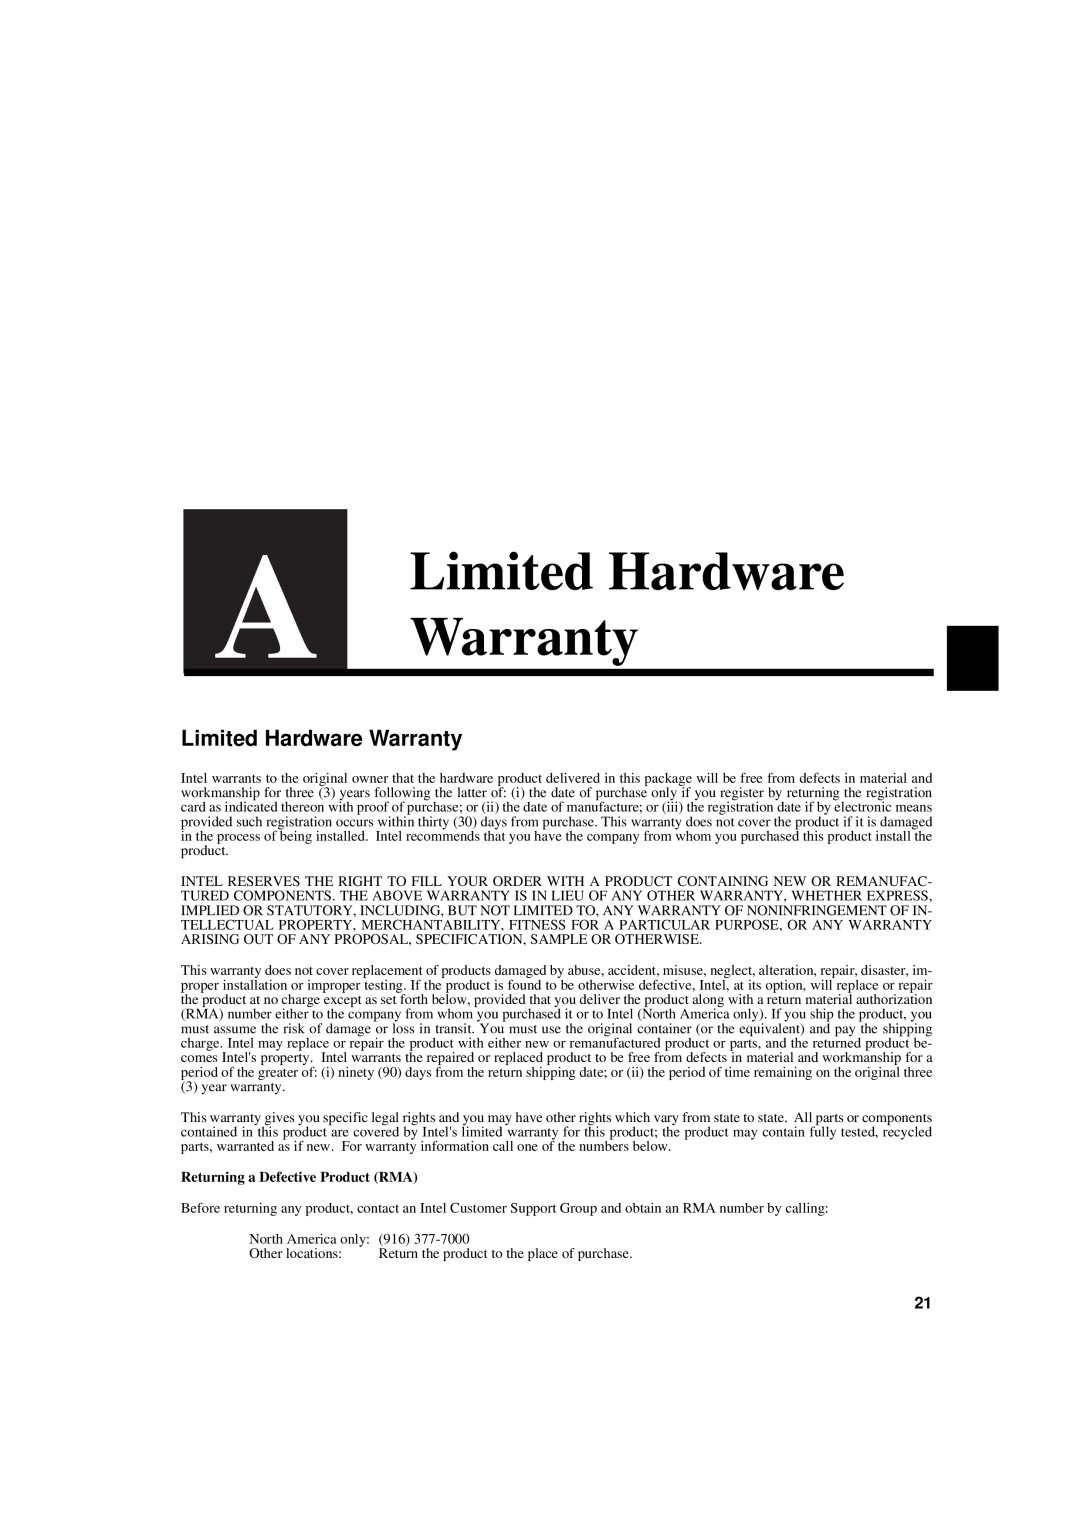 Intel 1000SX, 1000LX manual Limited Hardware Warranty, Returning a Defective Product RMA 